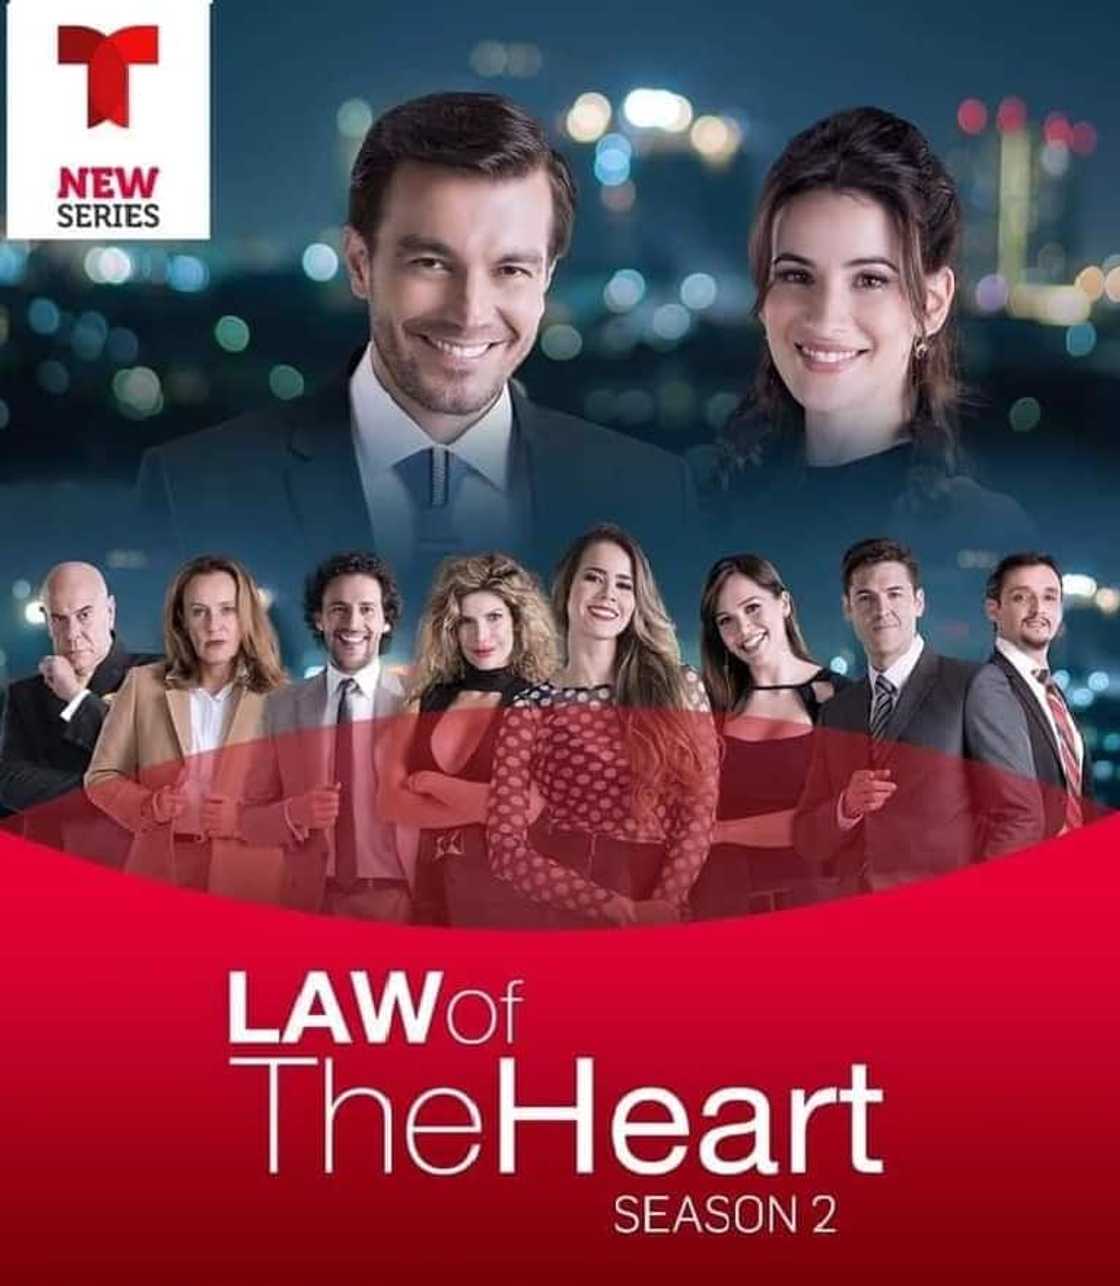 Law of the Heart 2 storyline